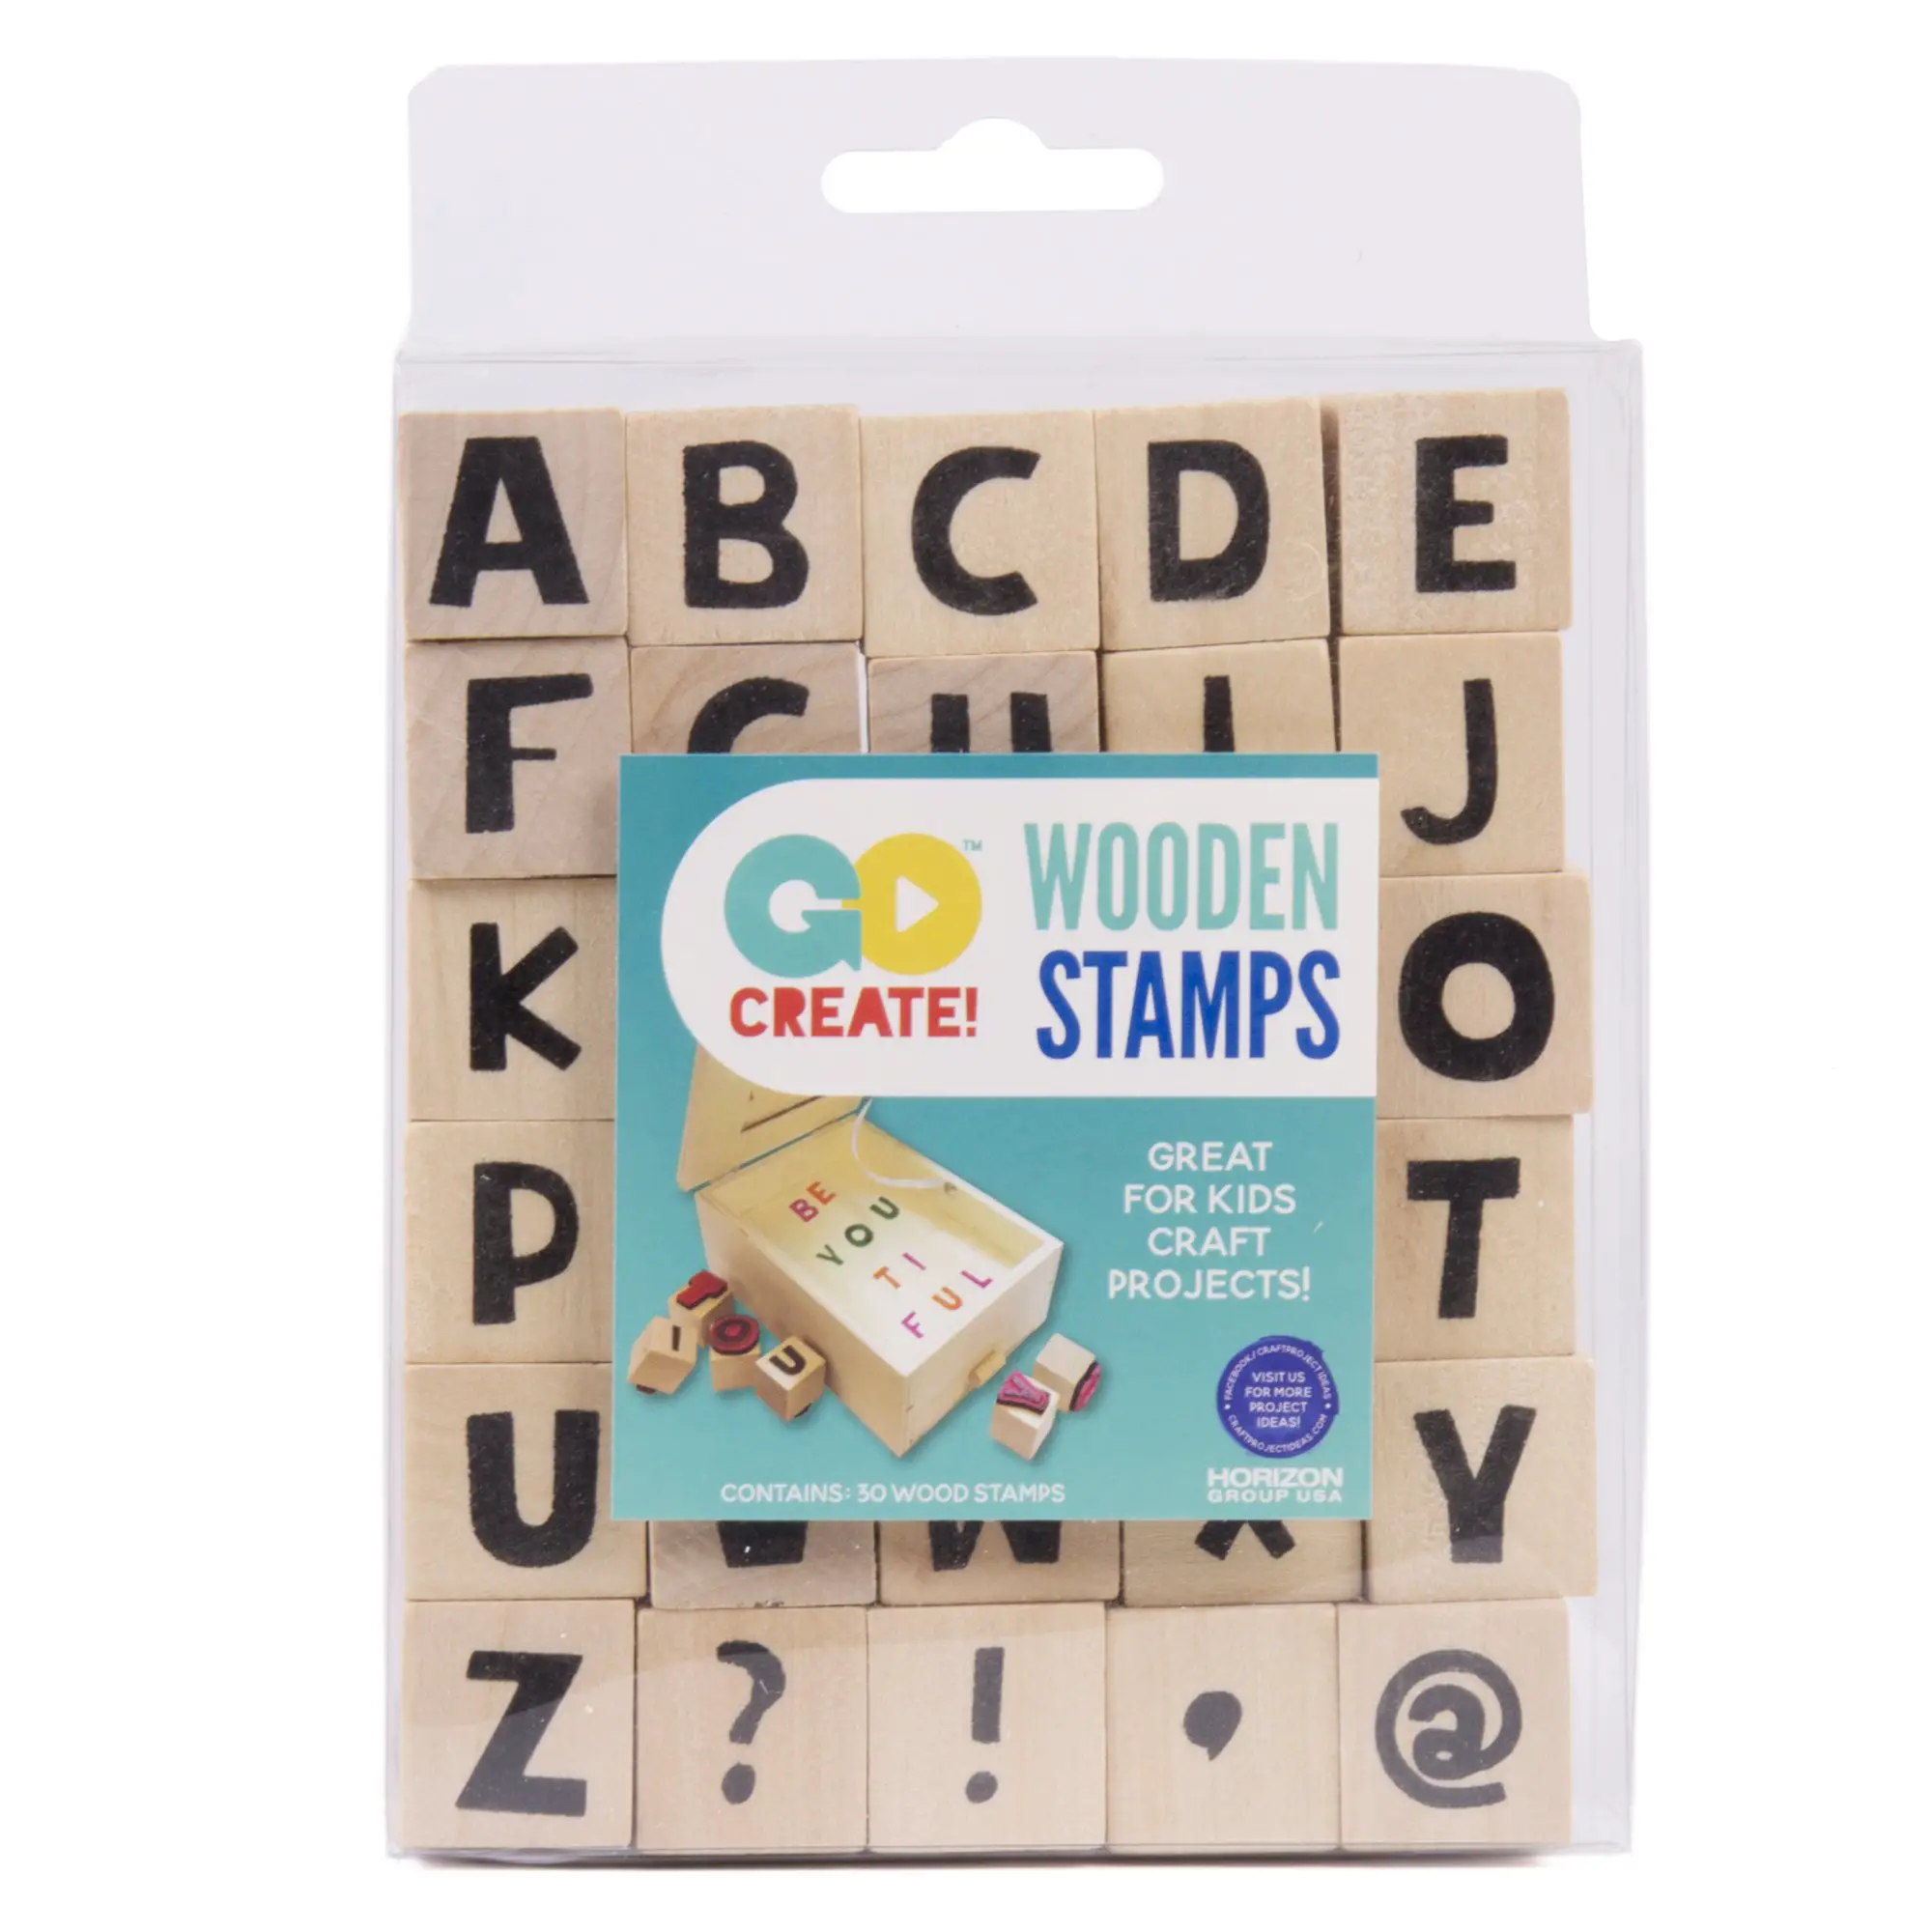 Go Create Wooden Stamps, 30 Piece